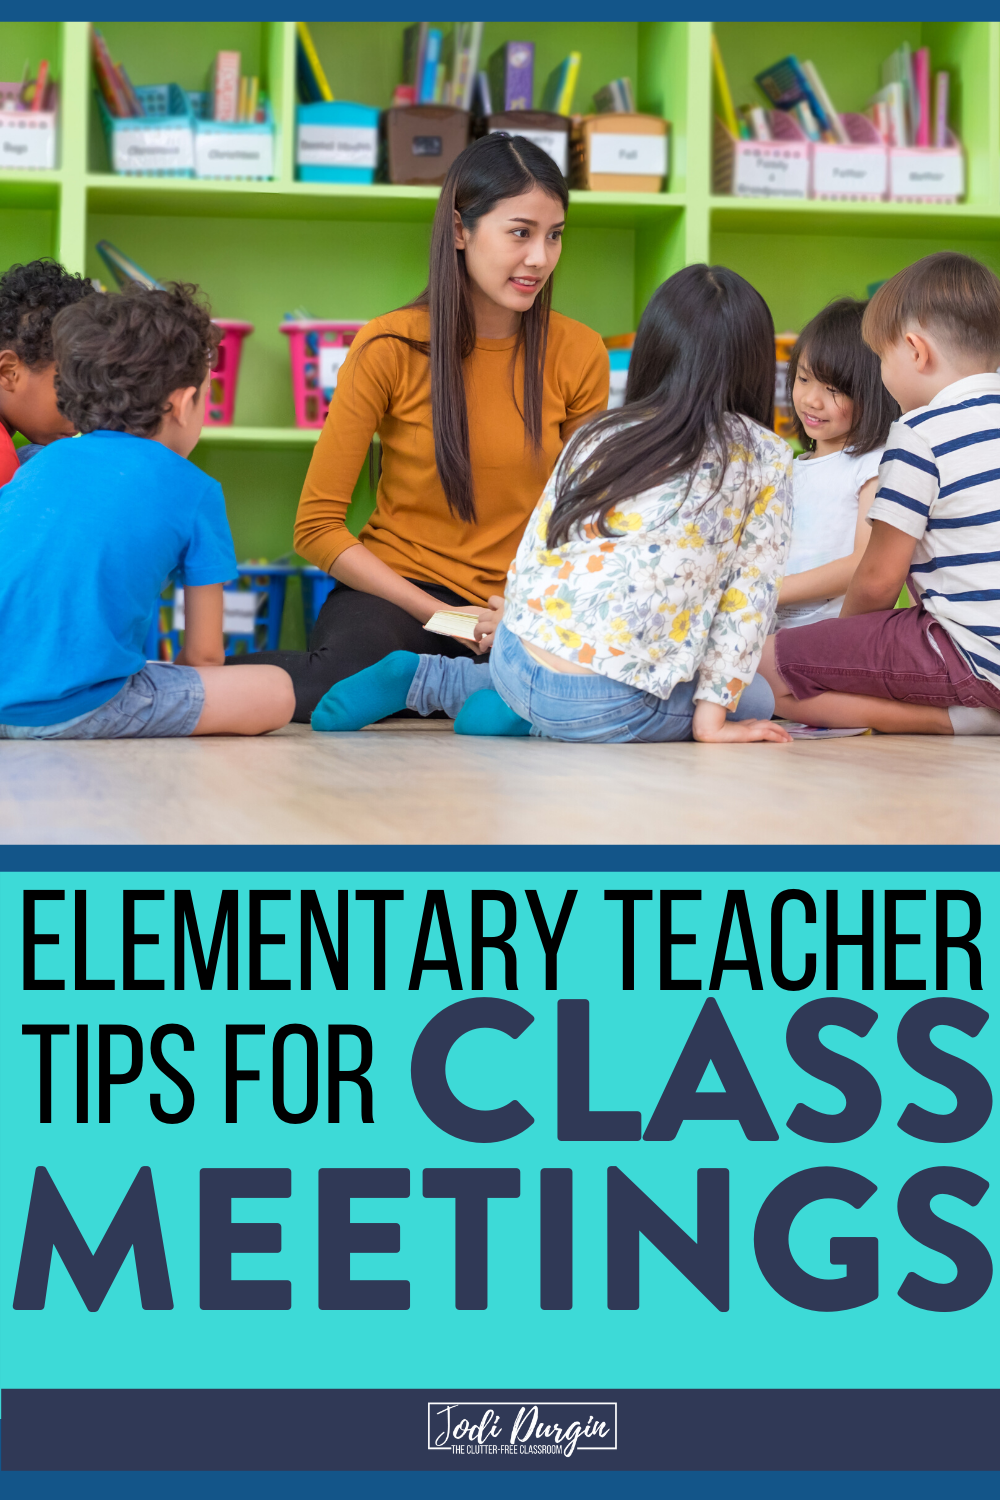 Learn what an elementary class meeting is, why it is important to do every morning, and tons of ideas for how to do it. We'll even go into the details about how the components of it fit together in a schedule structure for your 1st, 2nd, 3rd, 4th, or 5th grade classroom. Read this Clutter-Free Classroom blog post to learn more! #classmeeting #morningmeeting #responsiveclassroom #elementaryclassroom